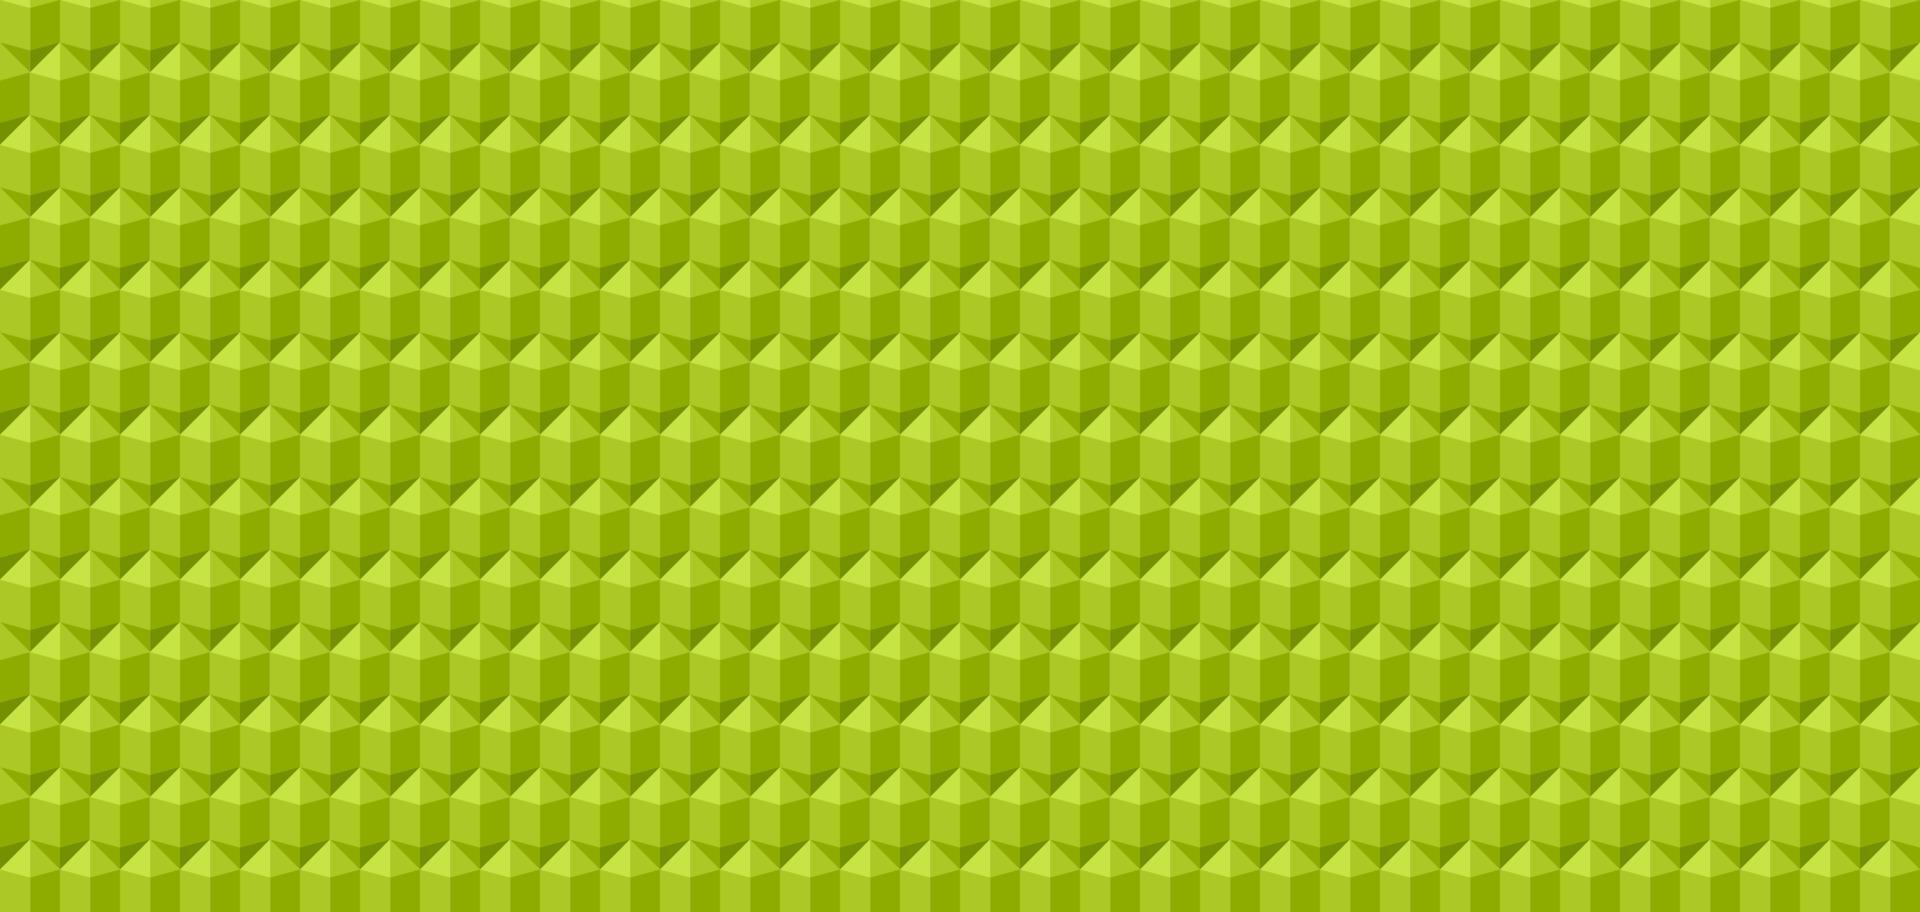 Background of green rhombuses vector